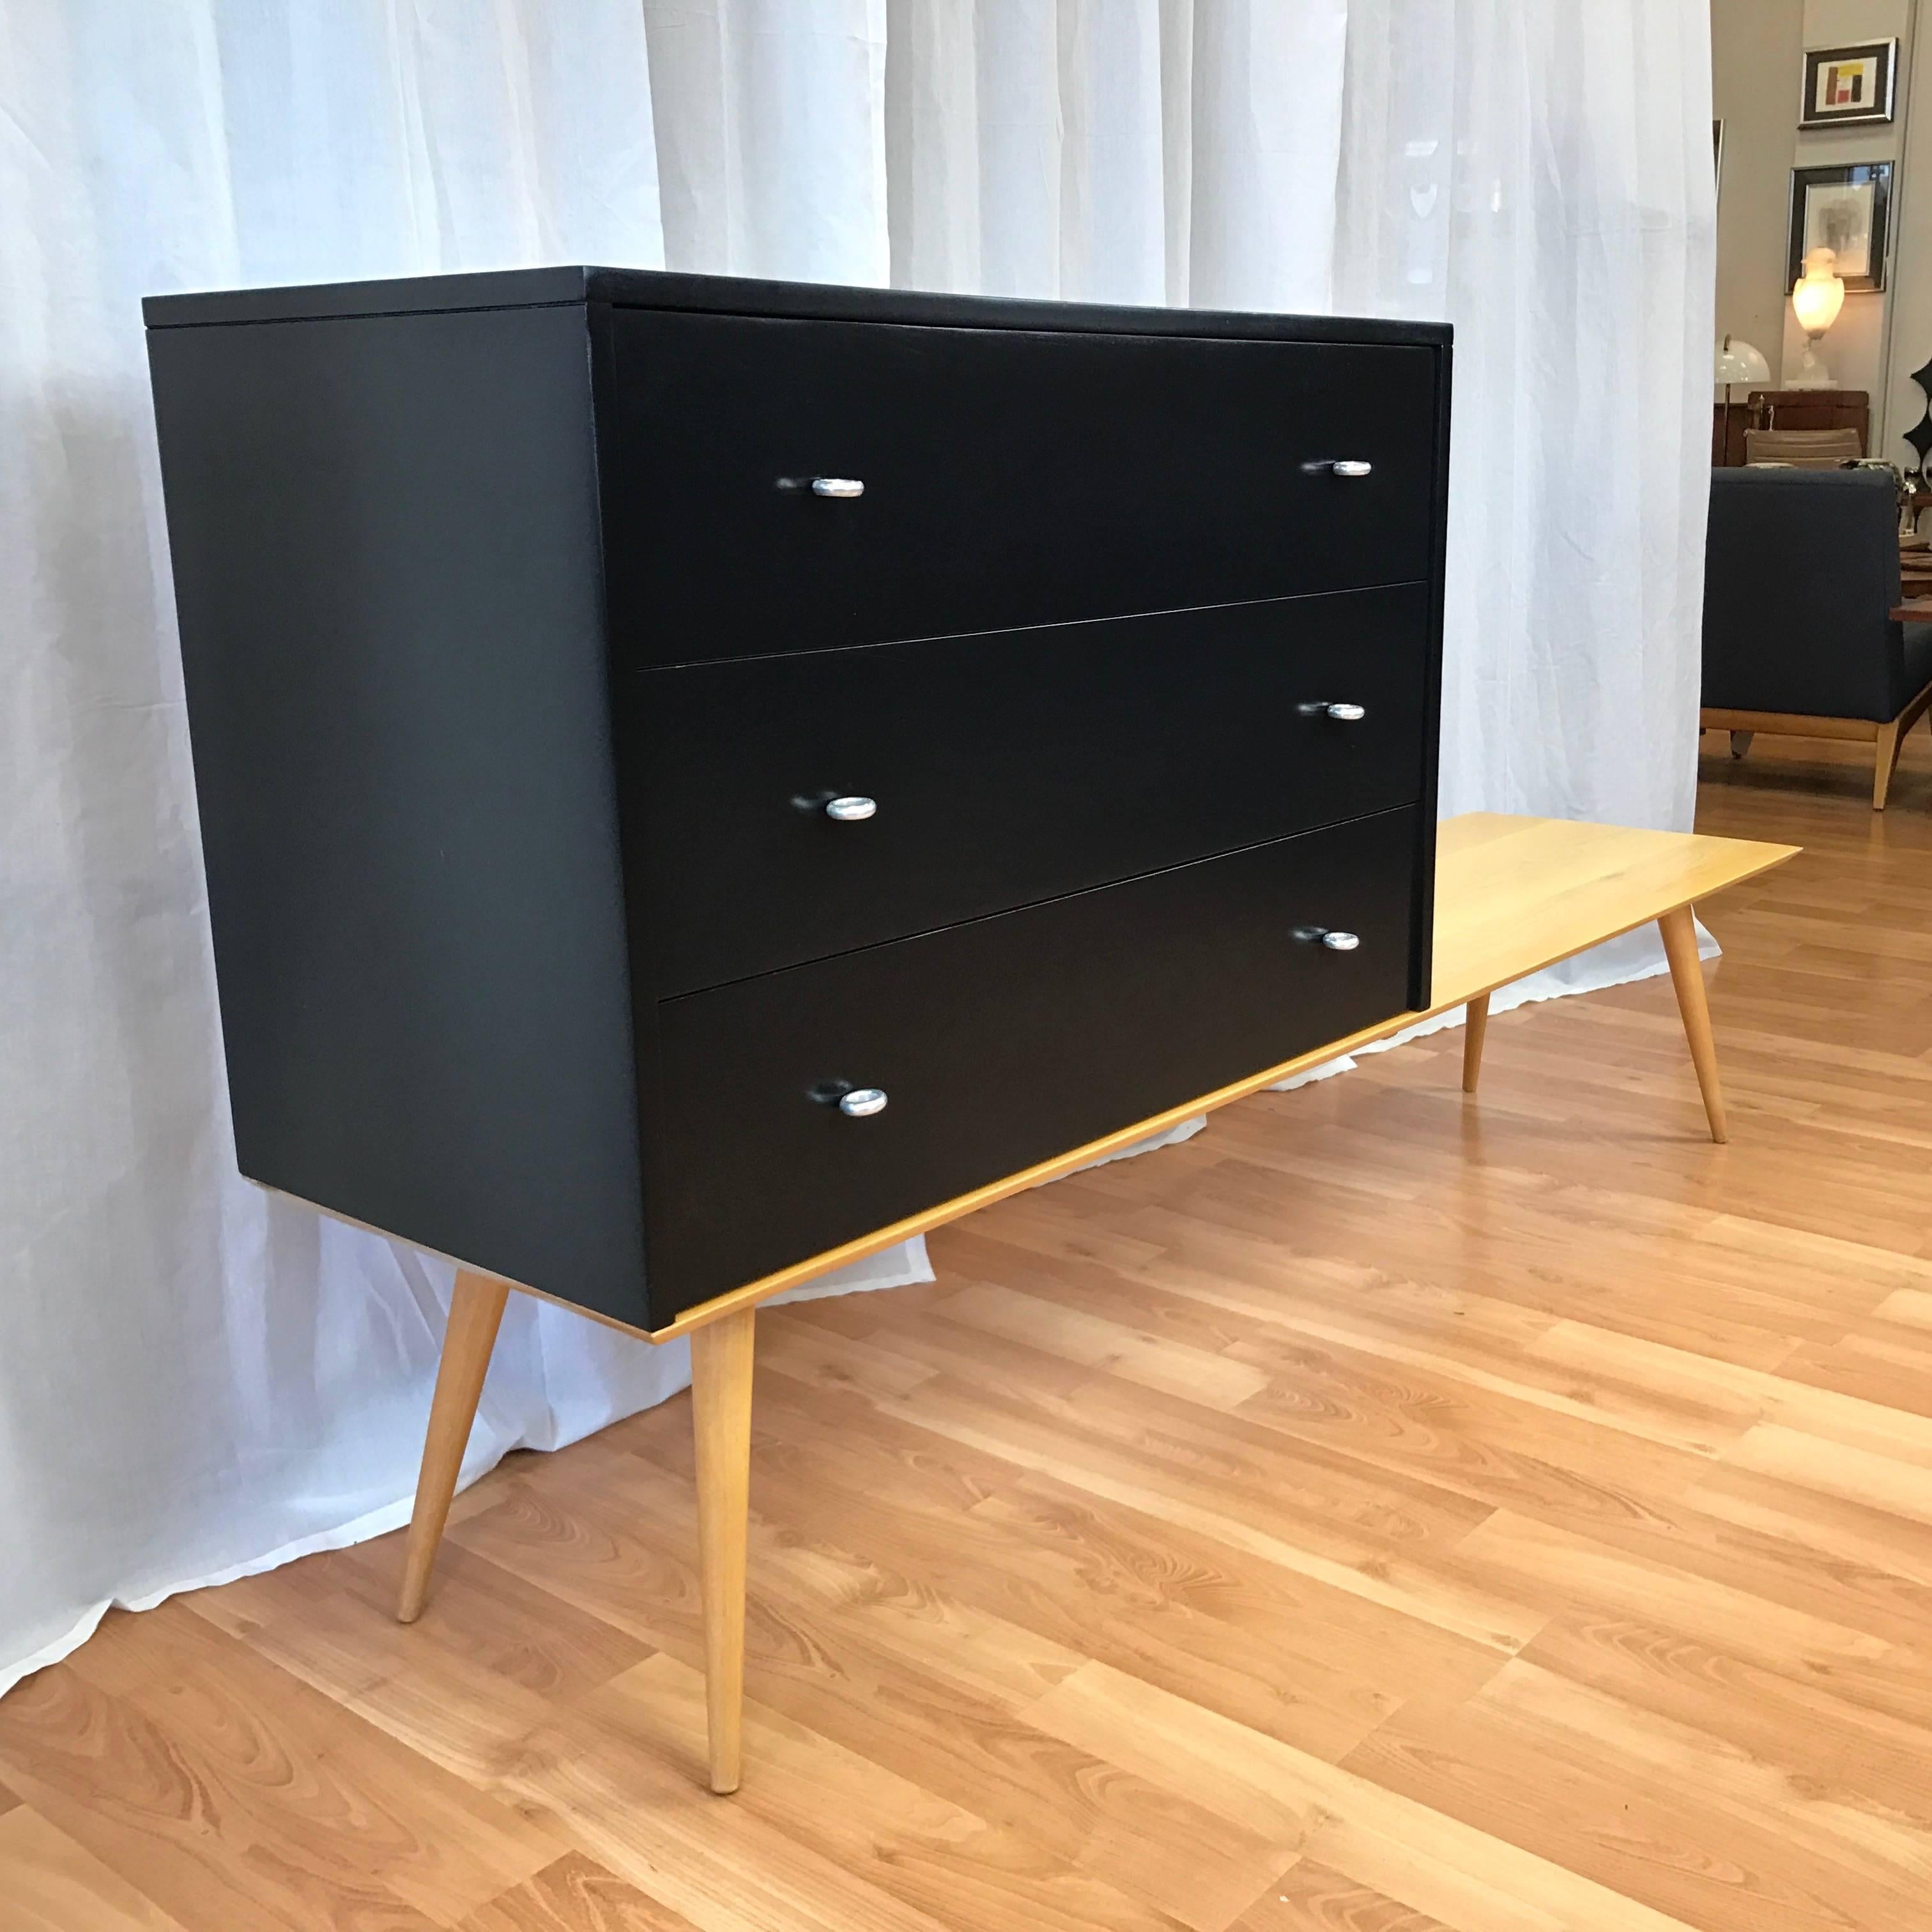 A “Planner Group” three-drawer chest by Paul McCobb for Winchendon Furniture with custom bench done in the manner of.

Chest or dresser features satin black lacquer finish and original aluminium ring pulls. Sits on a six-foot long well-made maple